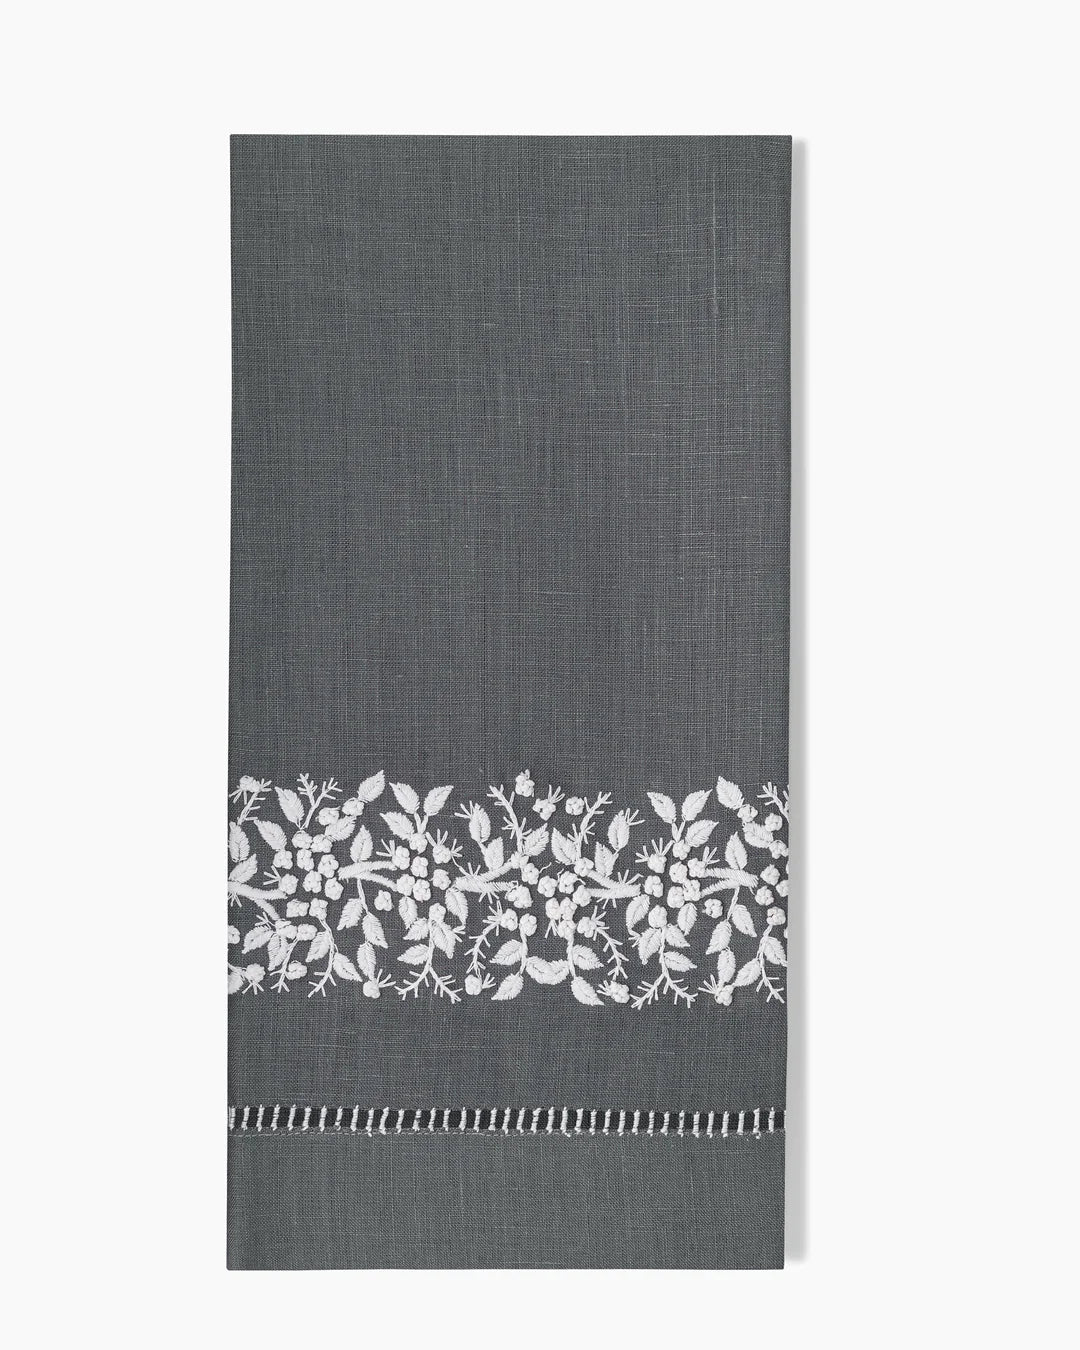 Jardin Classic Linen Hand Towels in Charcoal, Set of Two